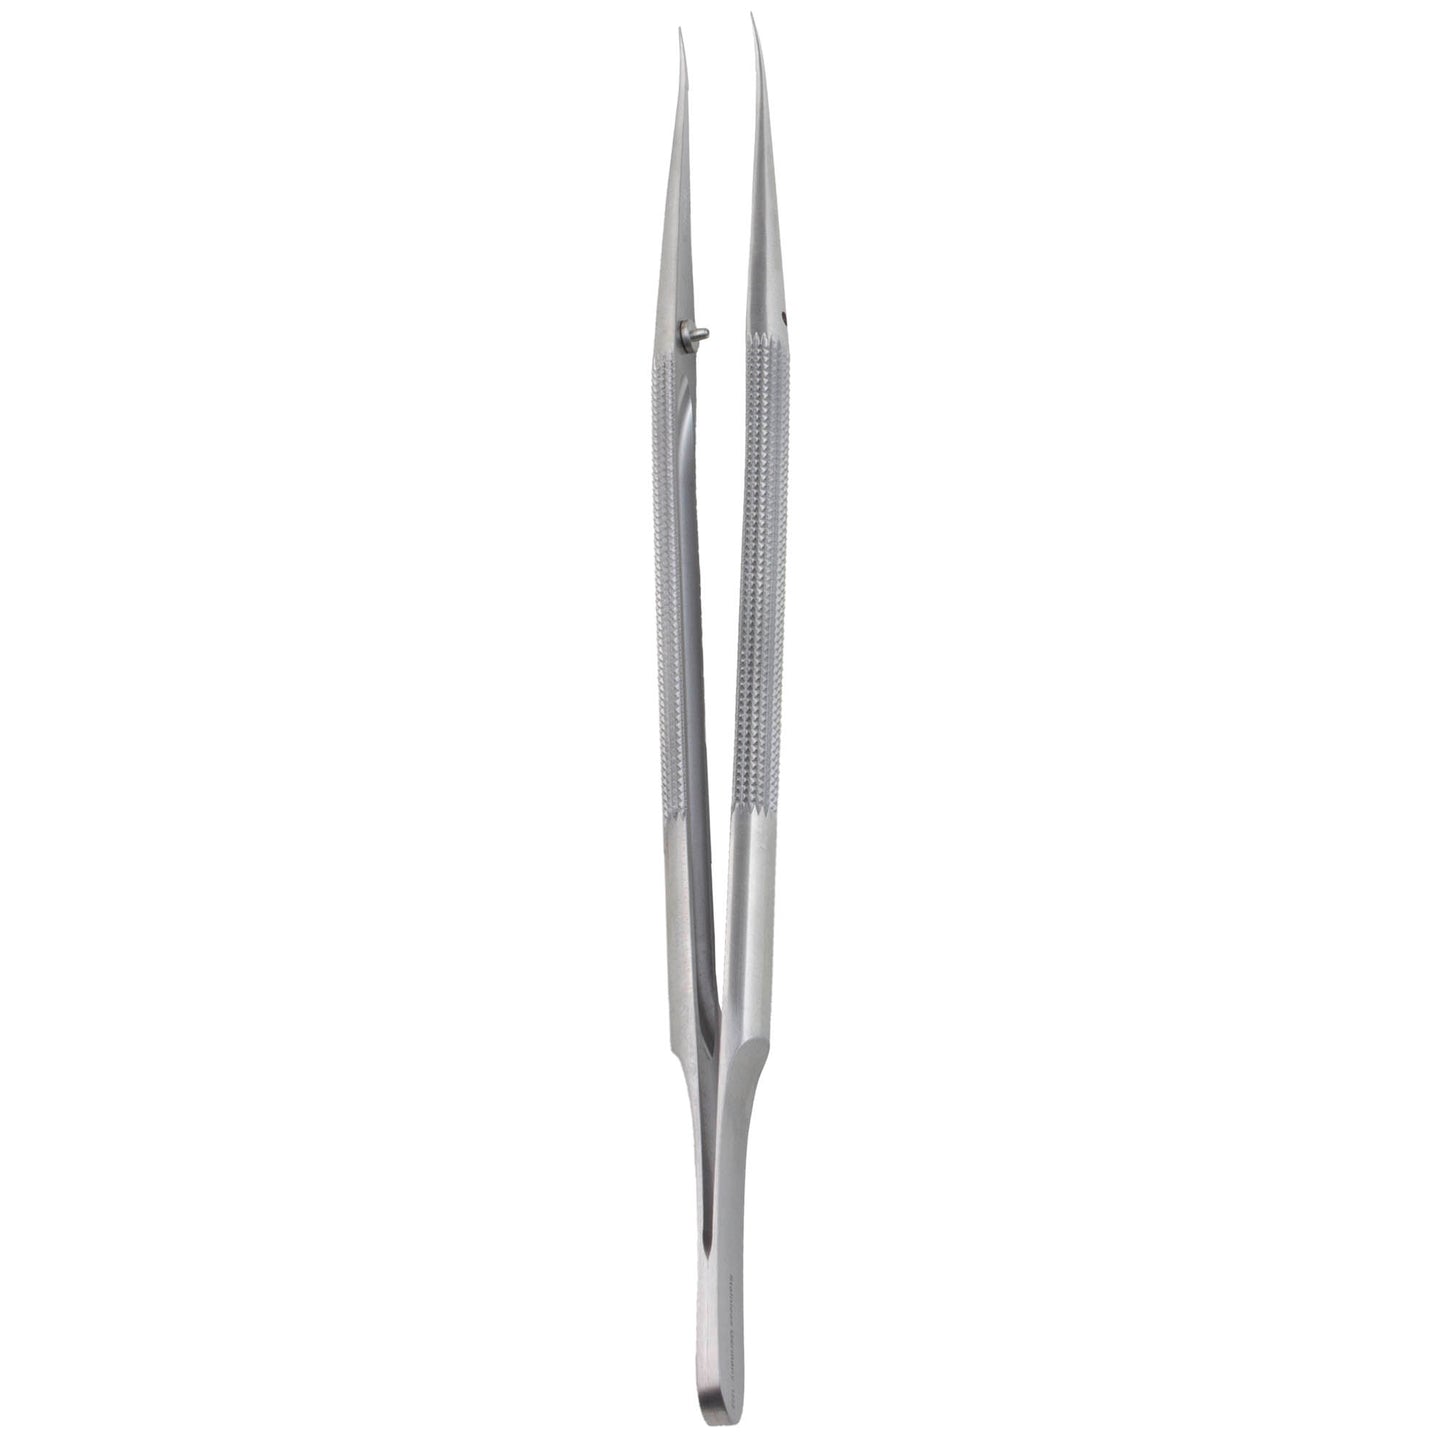 Curved Tip Micro Forceps (8mm round handle)